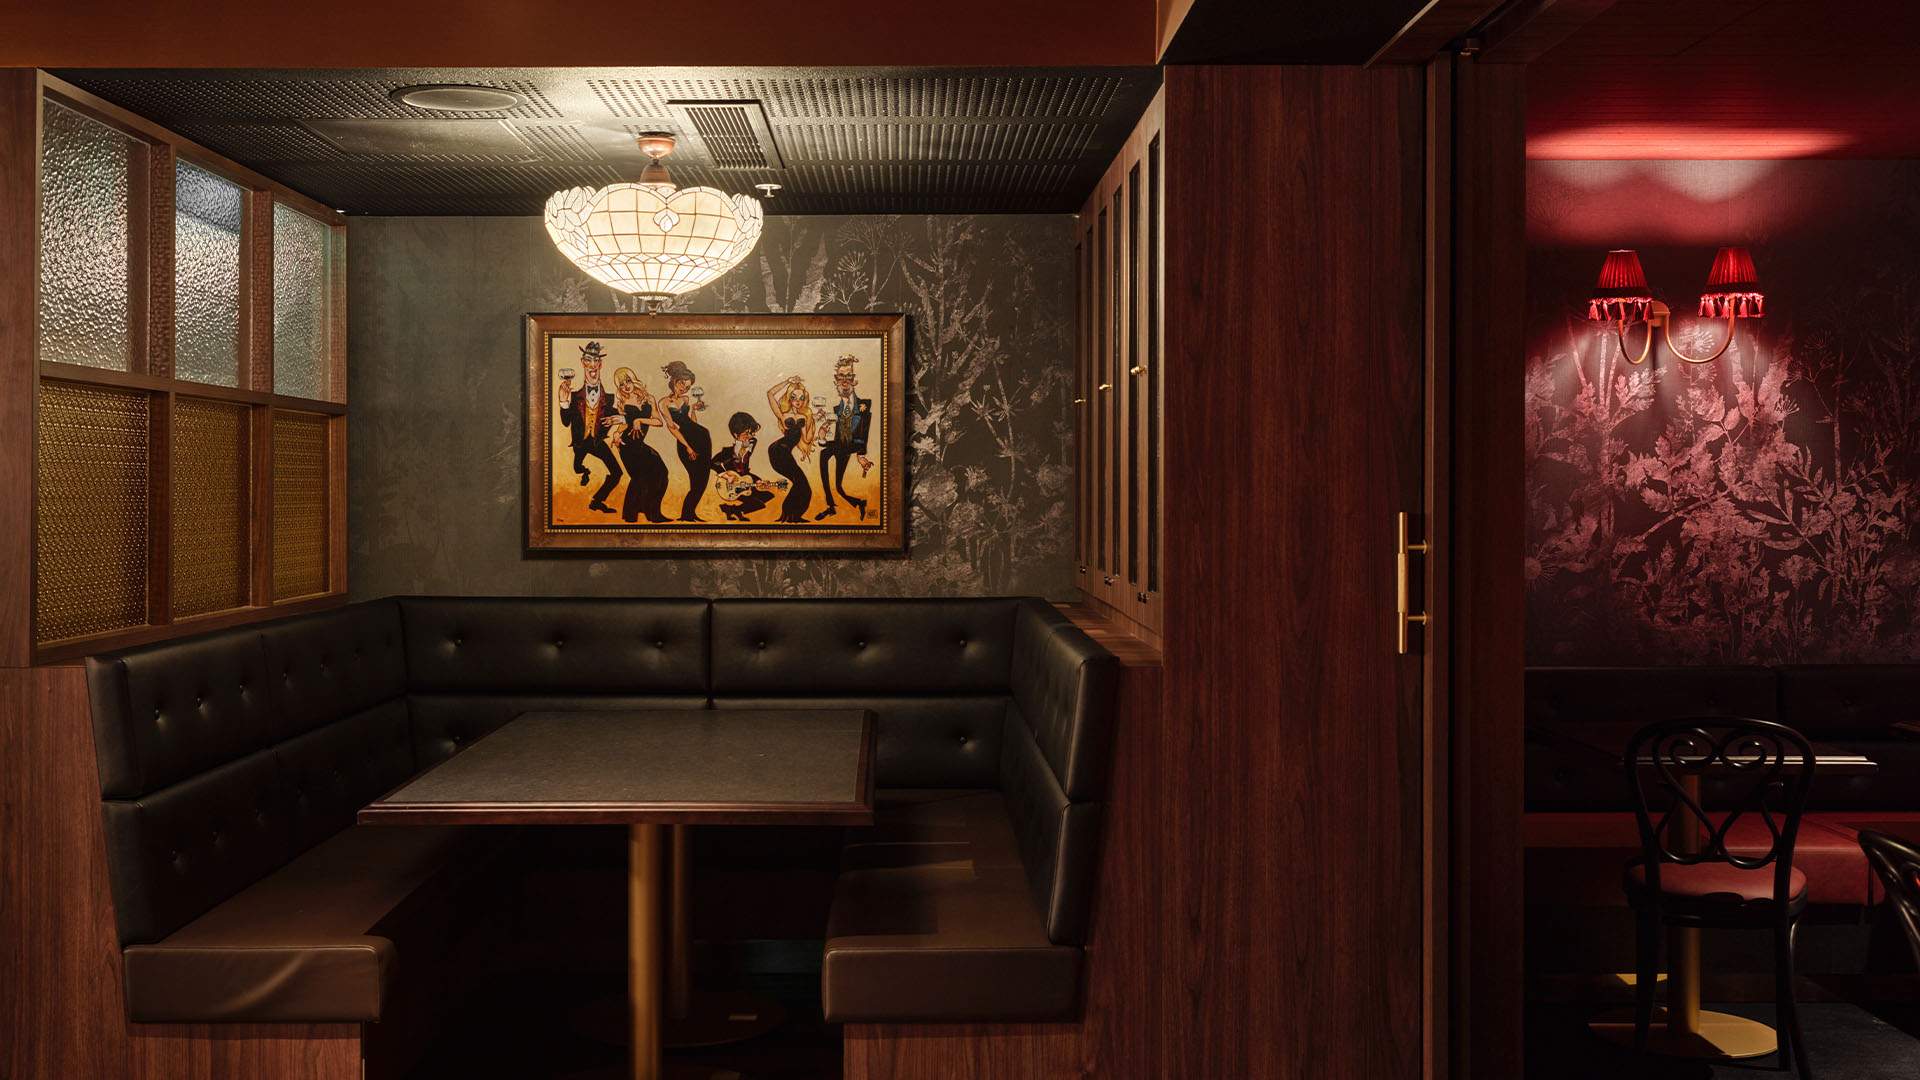 Award-Winning Cocktail Bar Eau-de-Vie Has Reopened in Its New Home Three Years After Leaving Darlinghurst